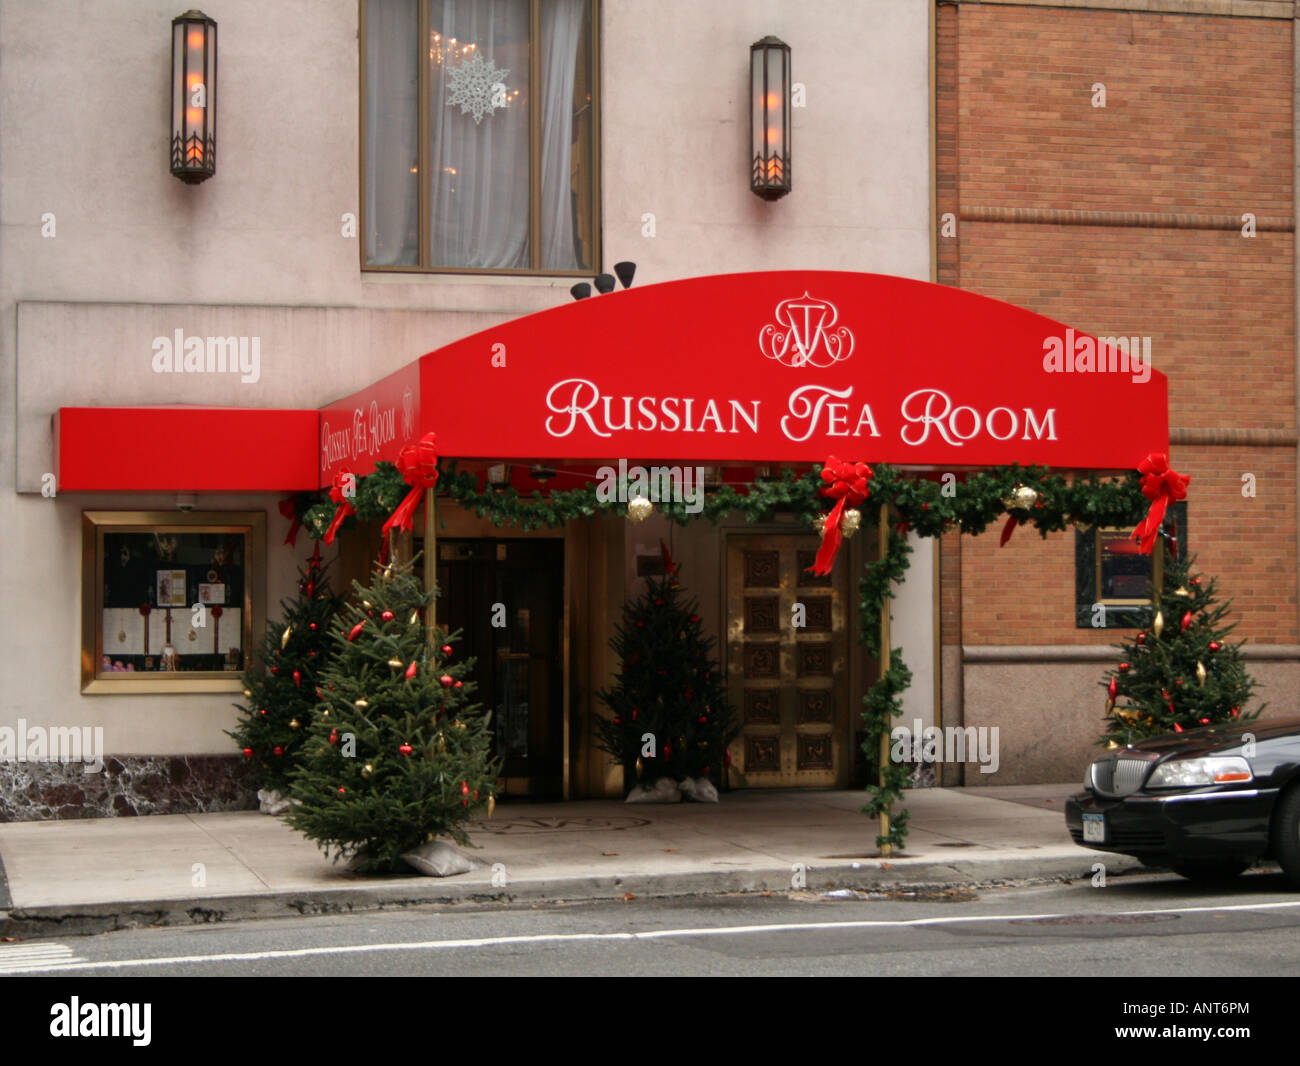 Exterior View Of Entrance To Russian Tea Room Manhattan New